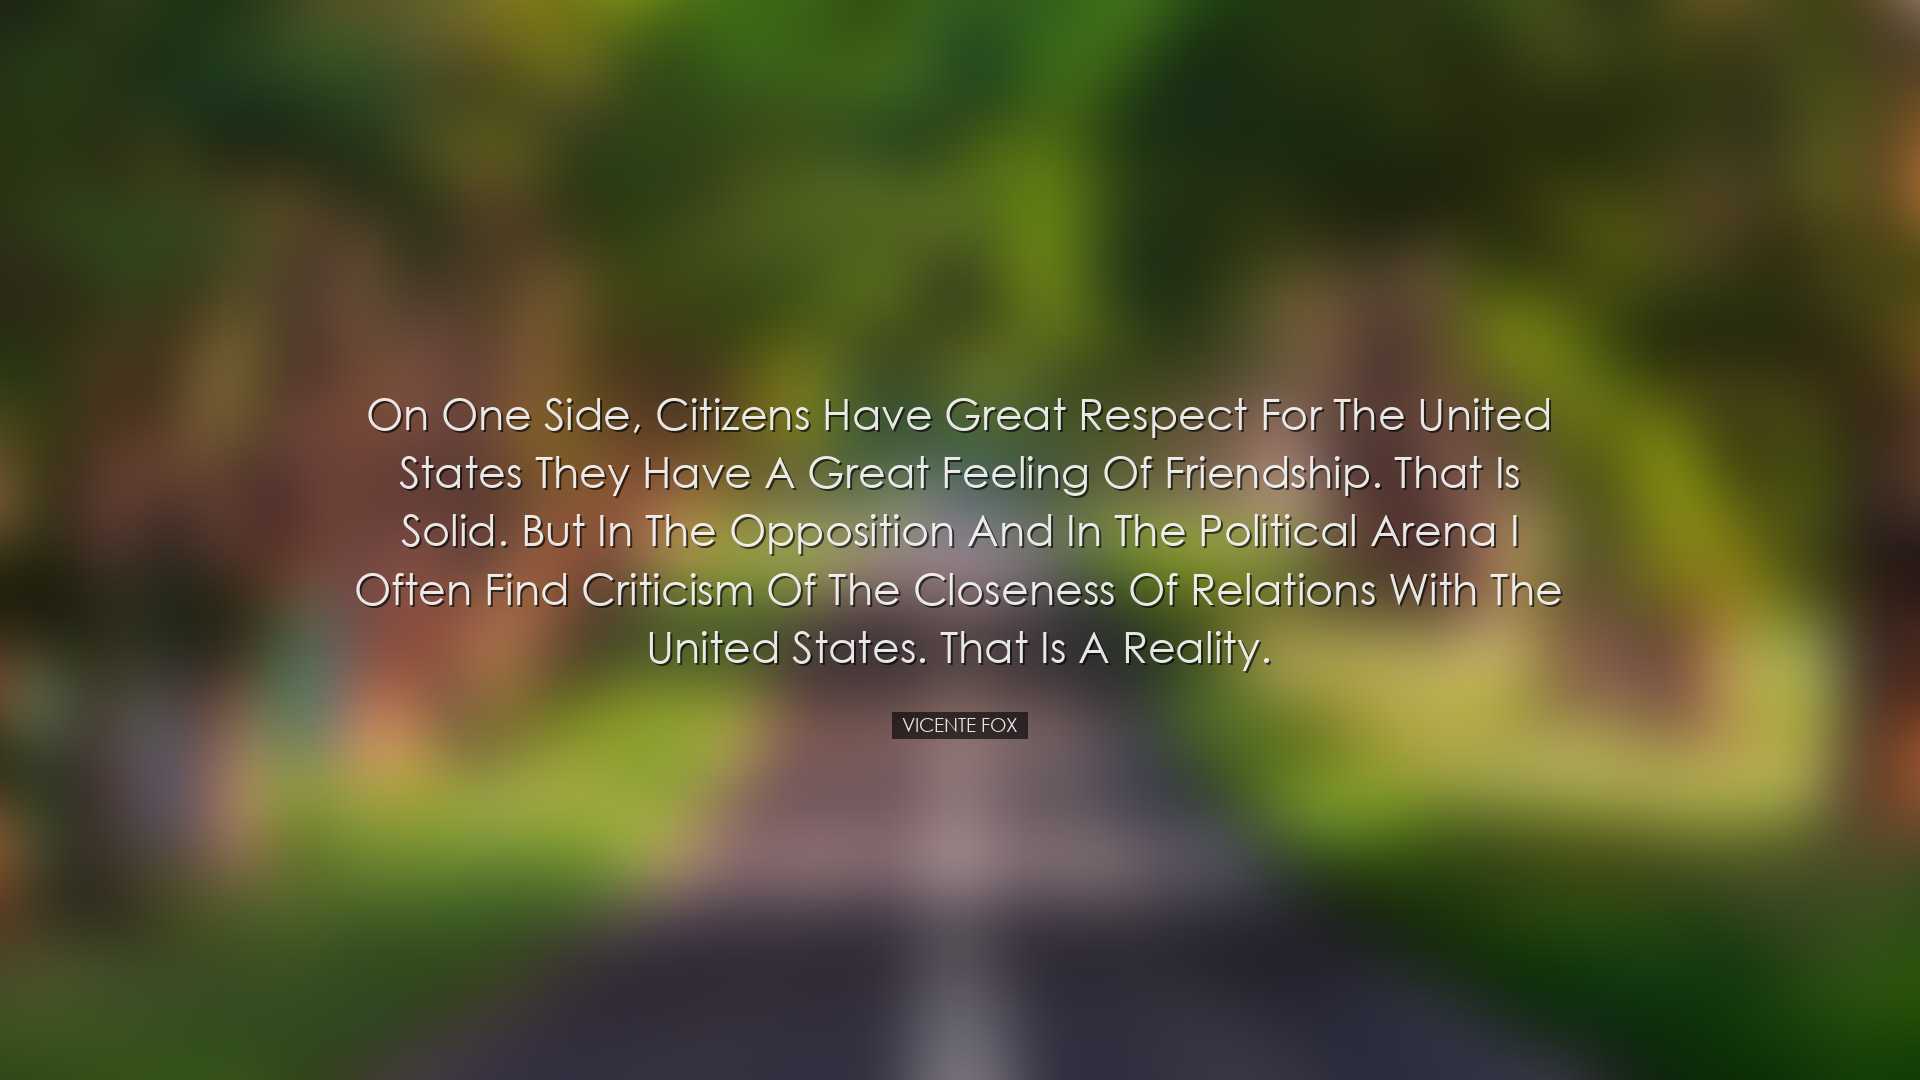 On one side, citizens have great respect for the United States the